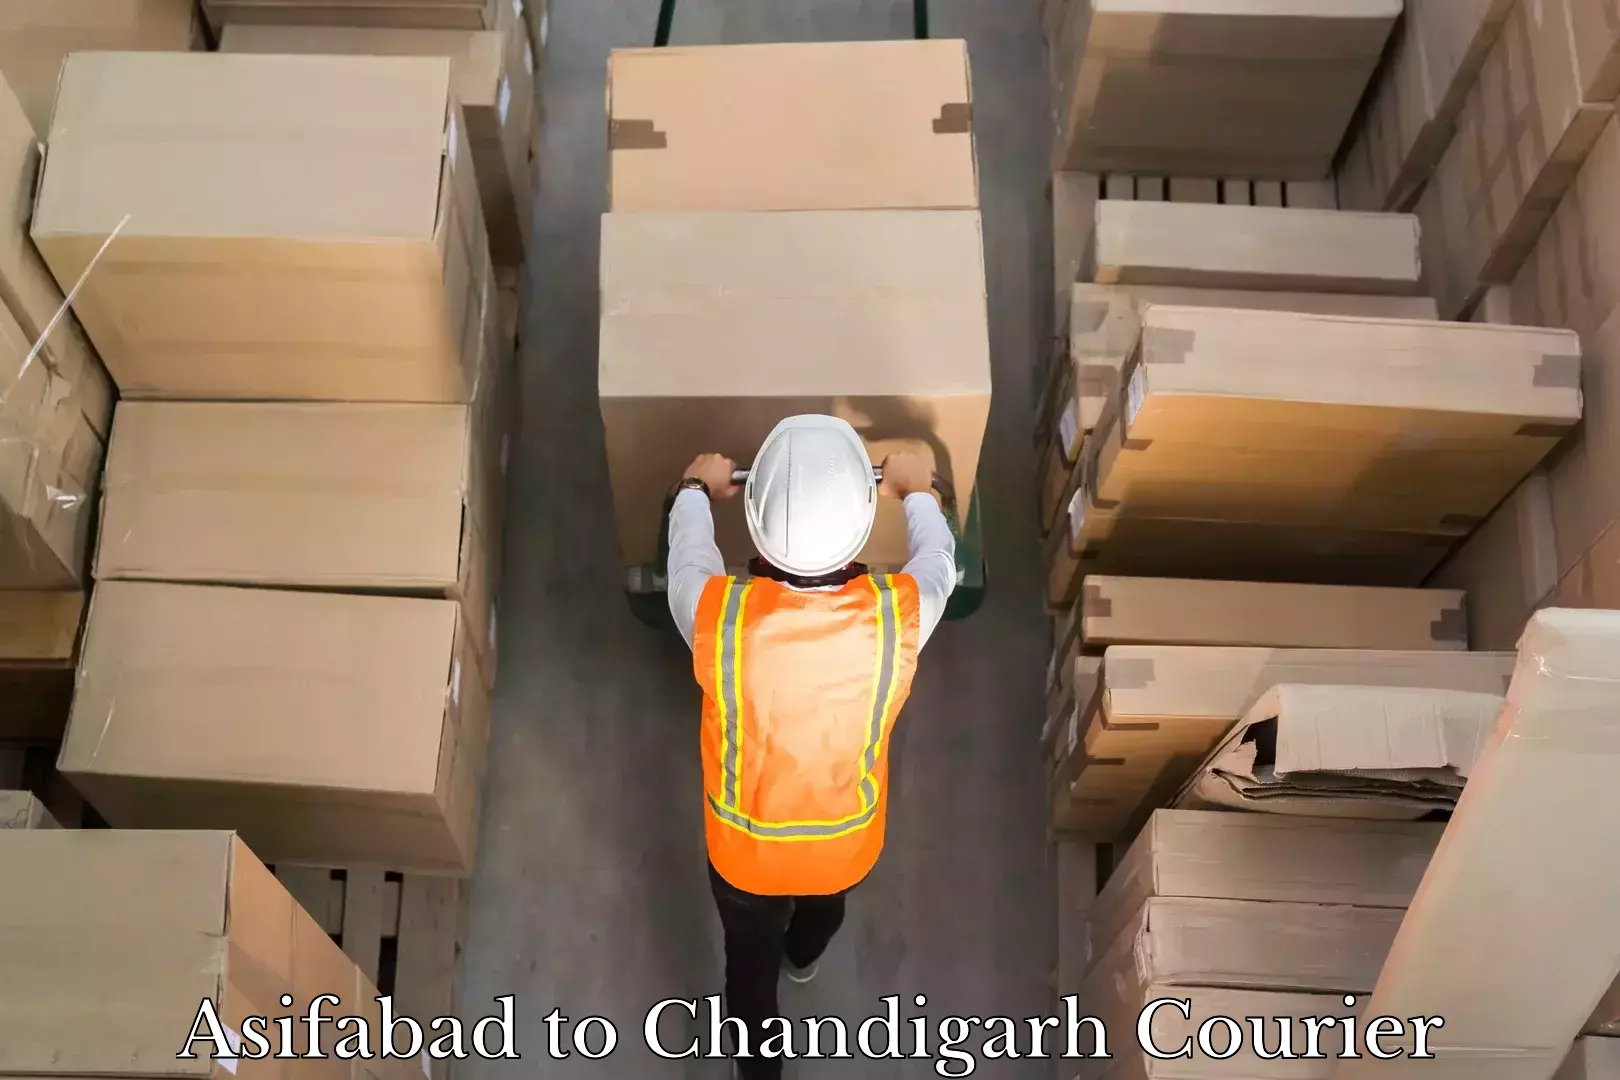 Smart shipping technology Asifabad to Chandigarh